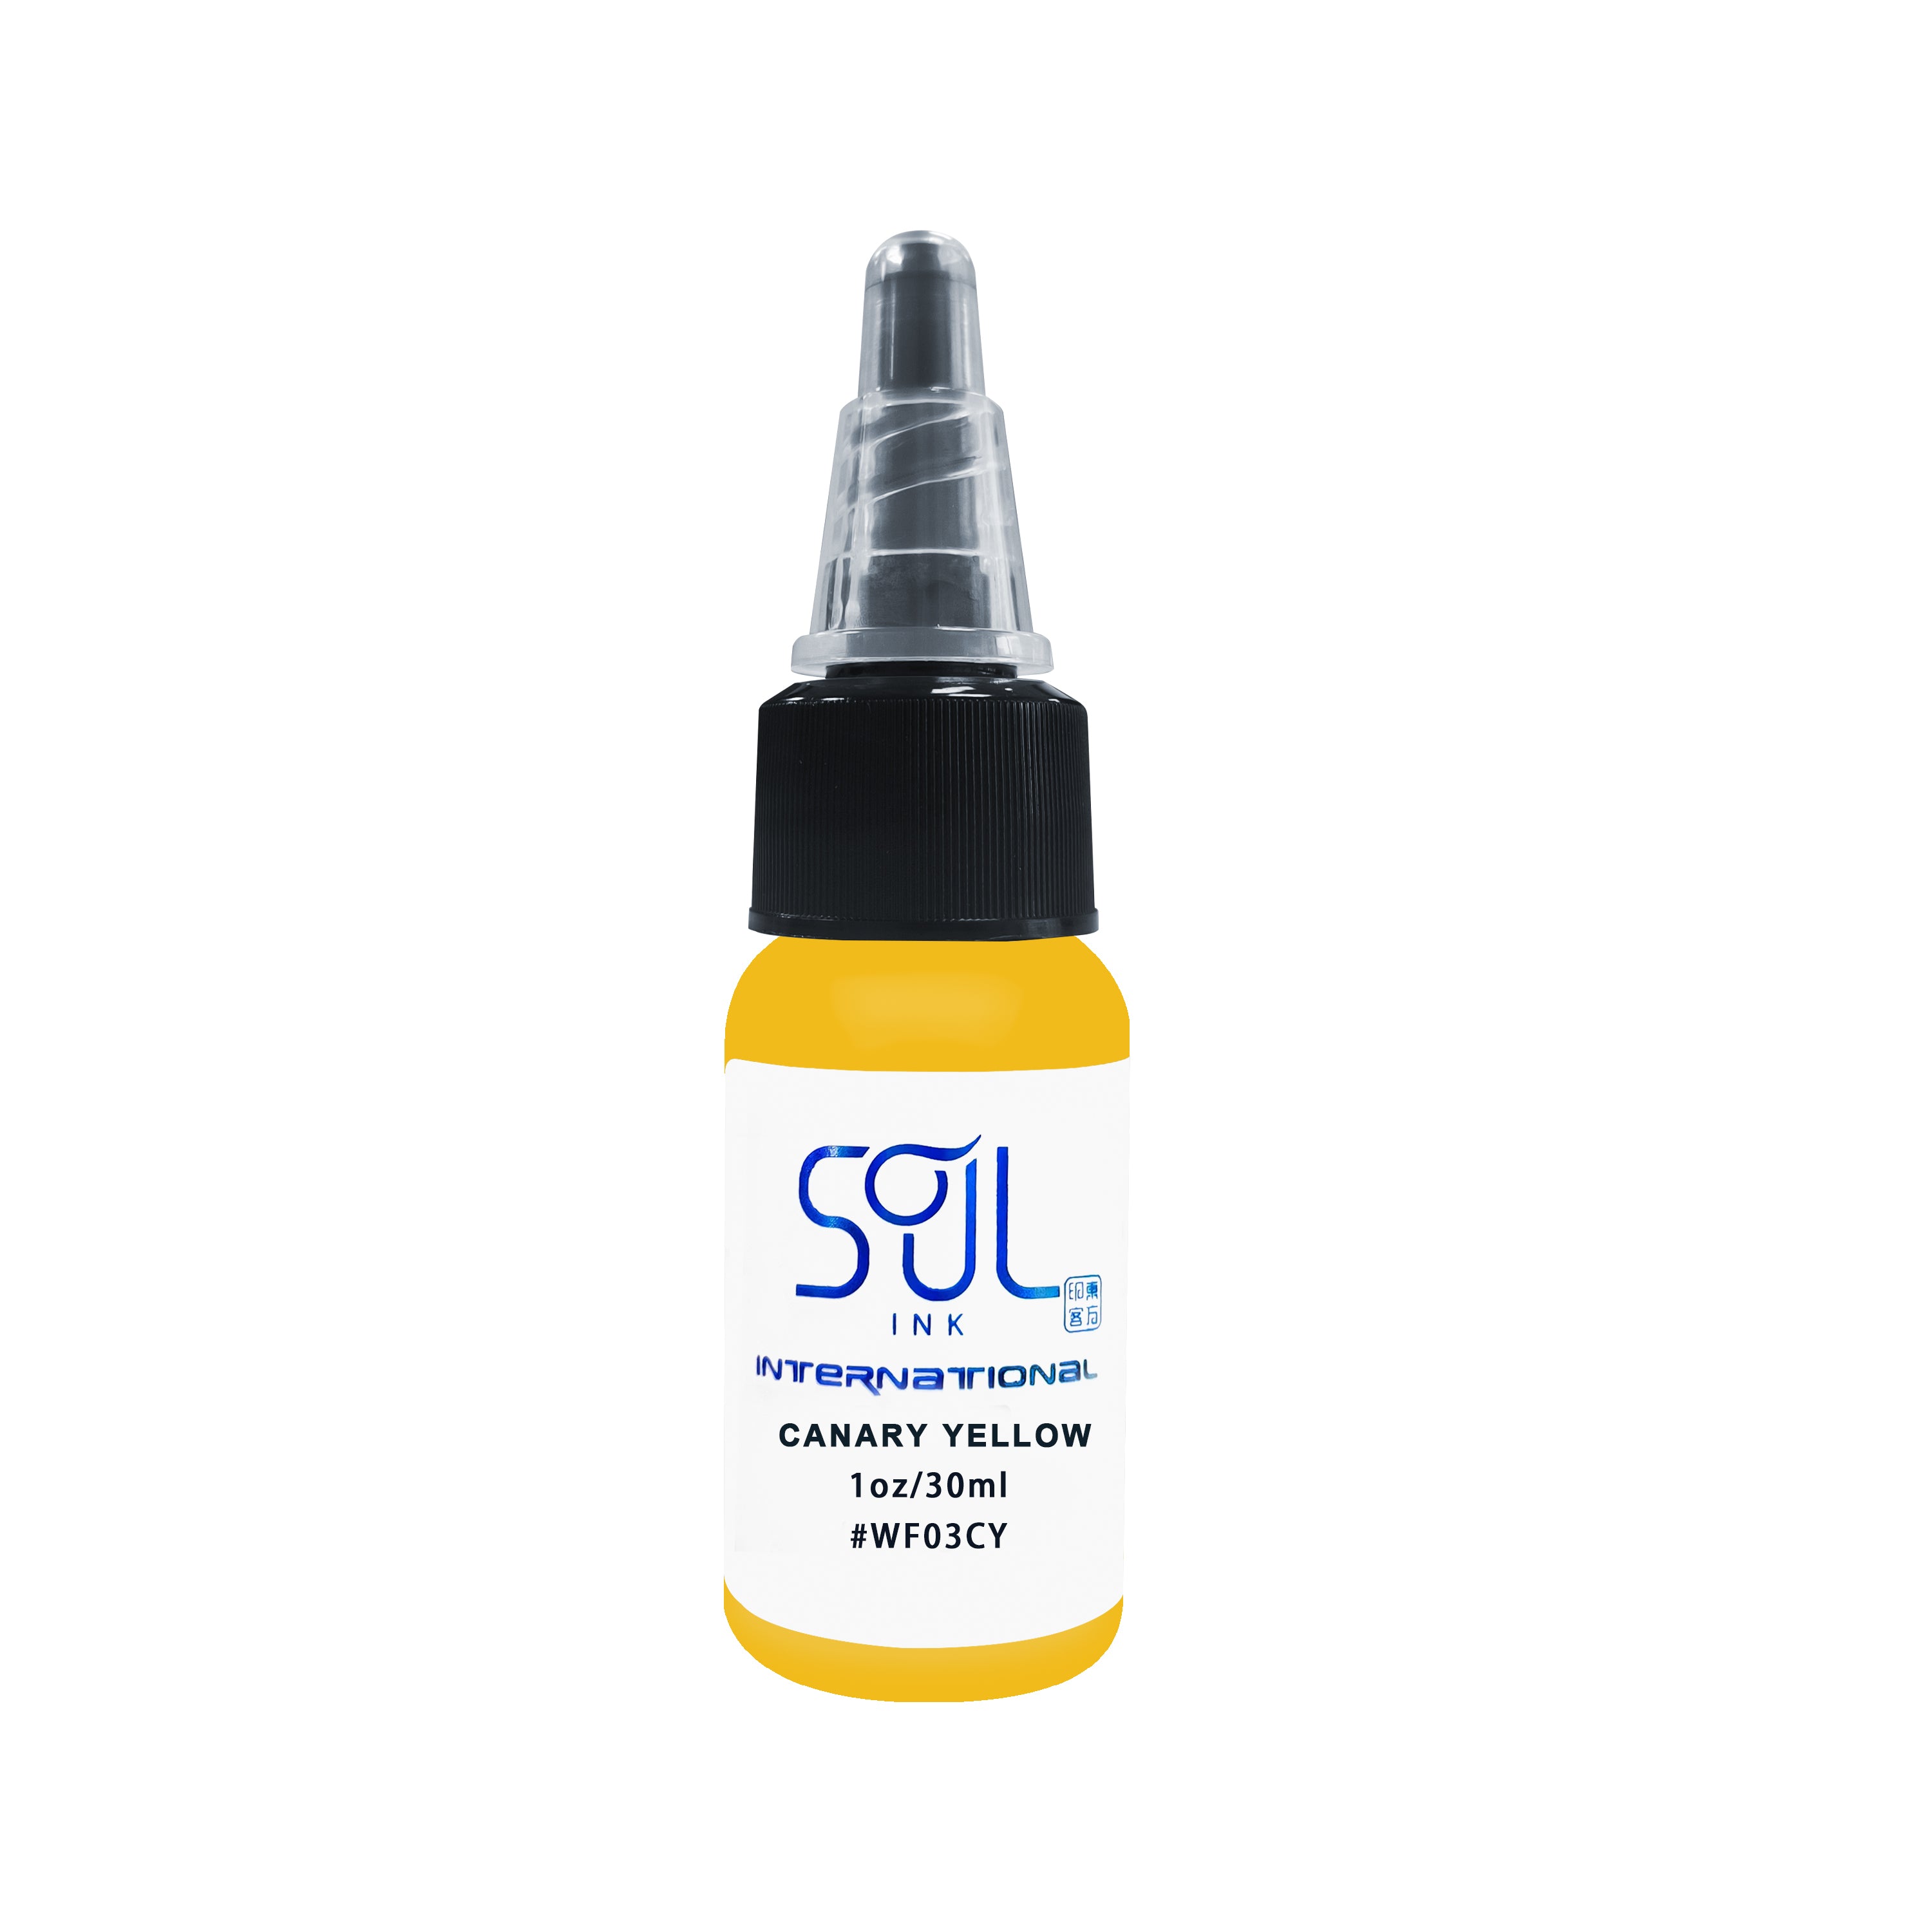 Photograph of a bottle of 'Soul Ink' brand canary yellow ink. The label prominently displays the brand name 'Soul Ink' in stylish blue typography against a white background. The canary yellow 30 ml bottle with a white label featuring the brands name 'Soul Ink'.